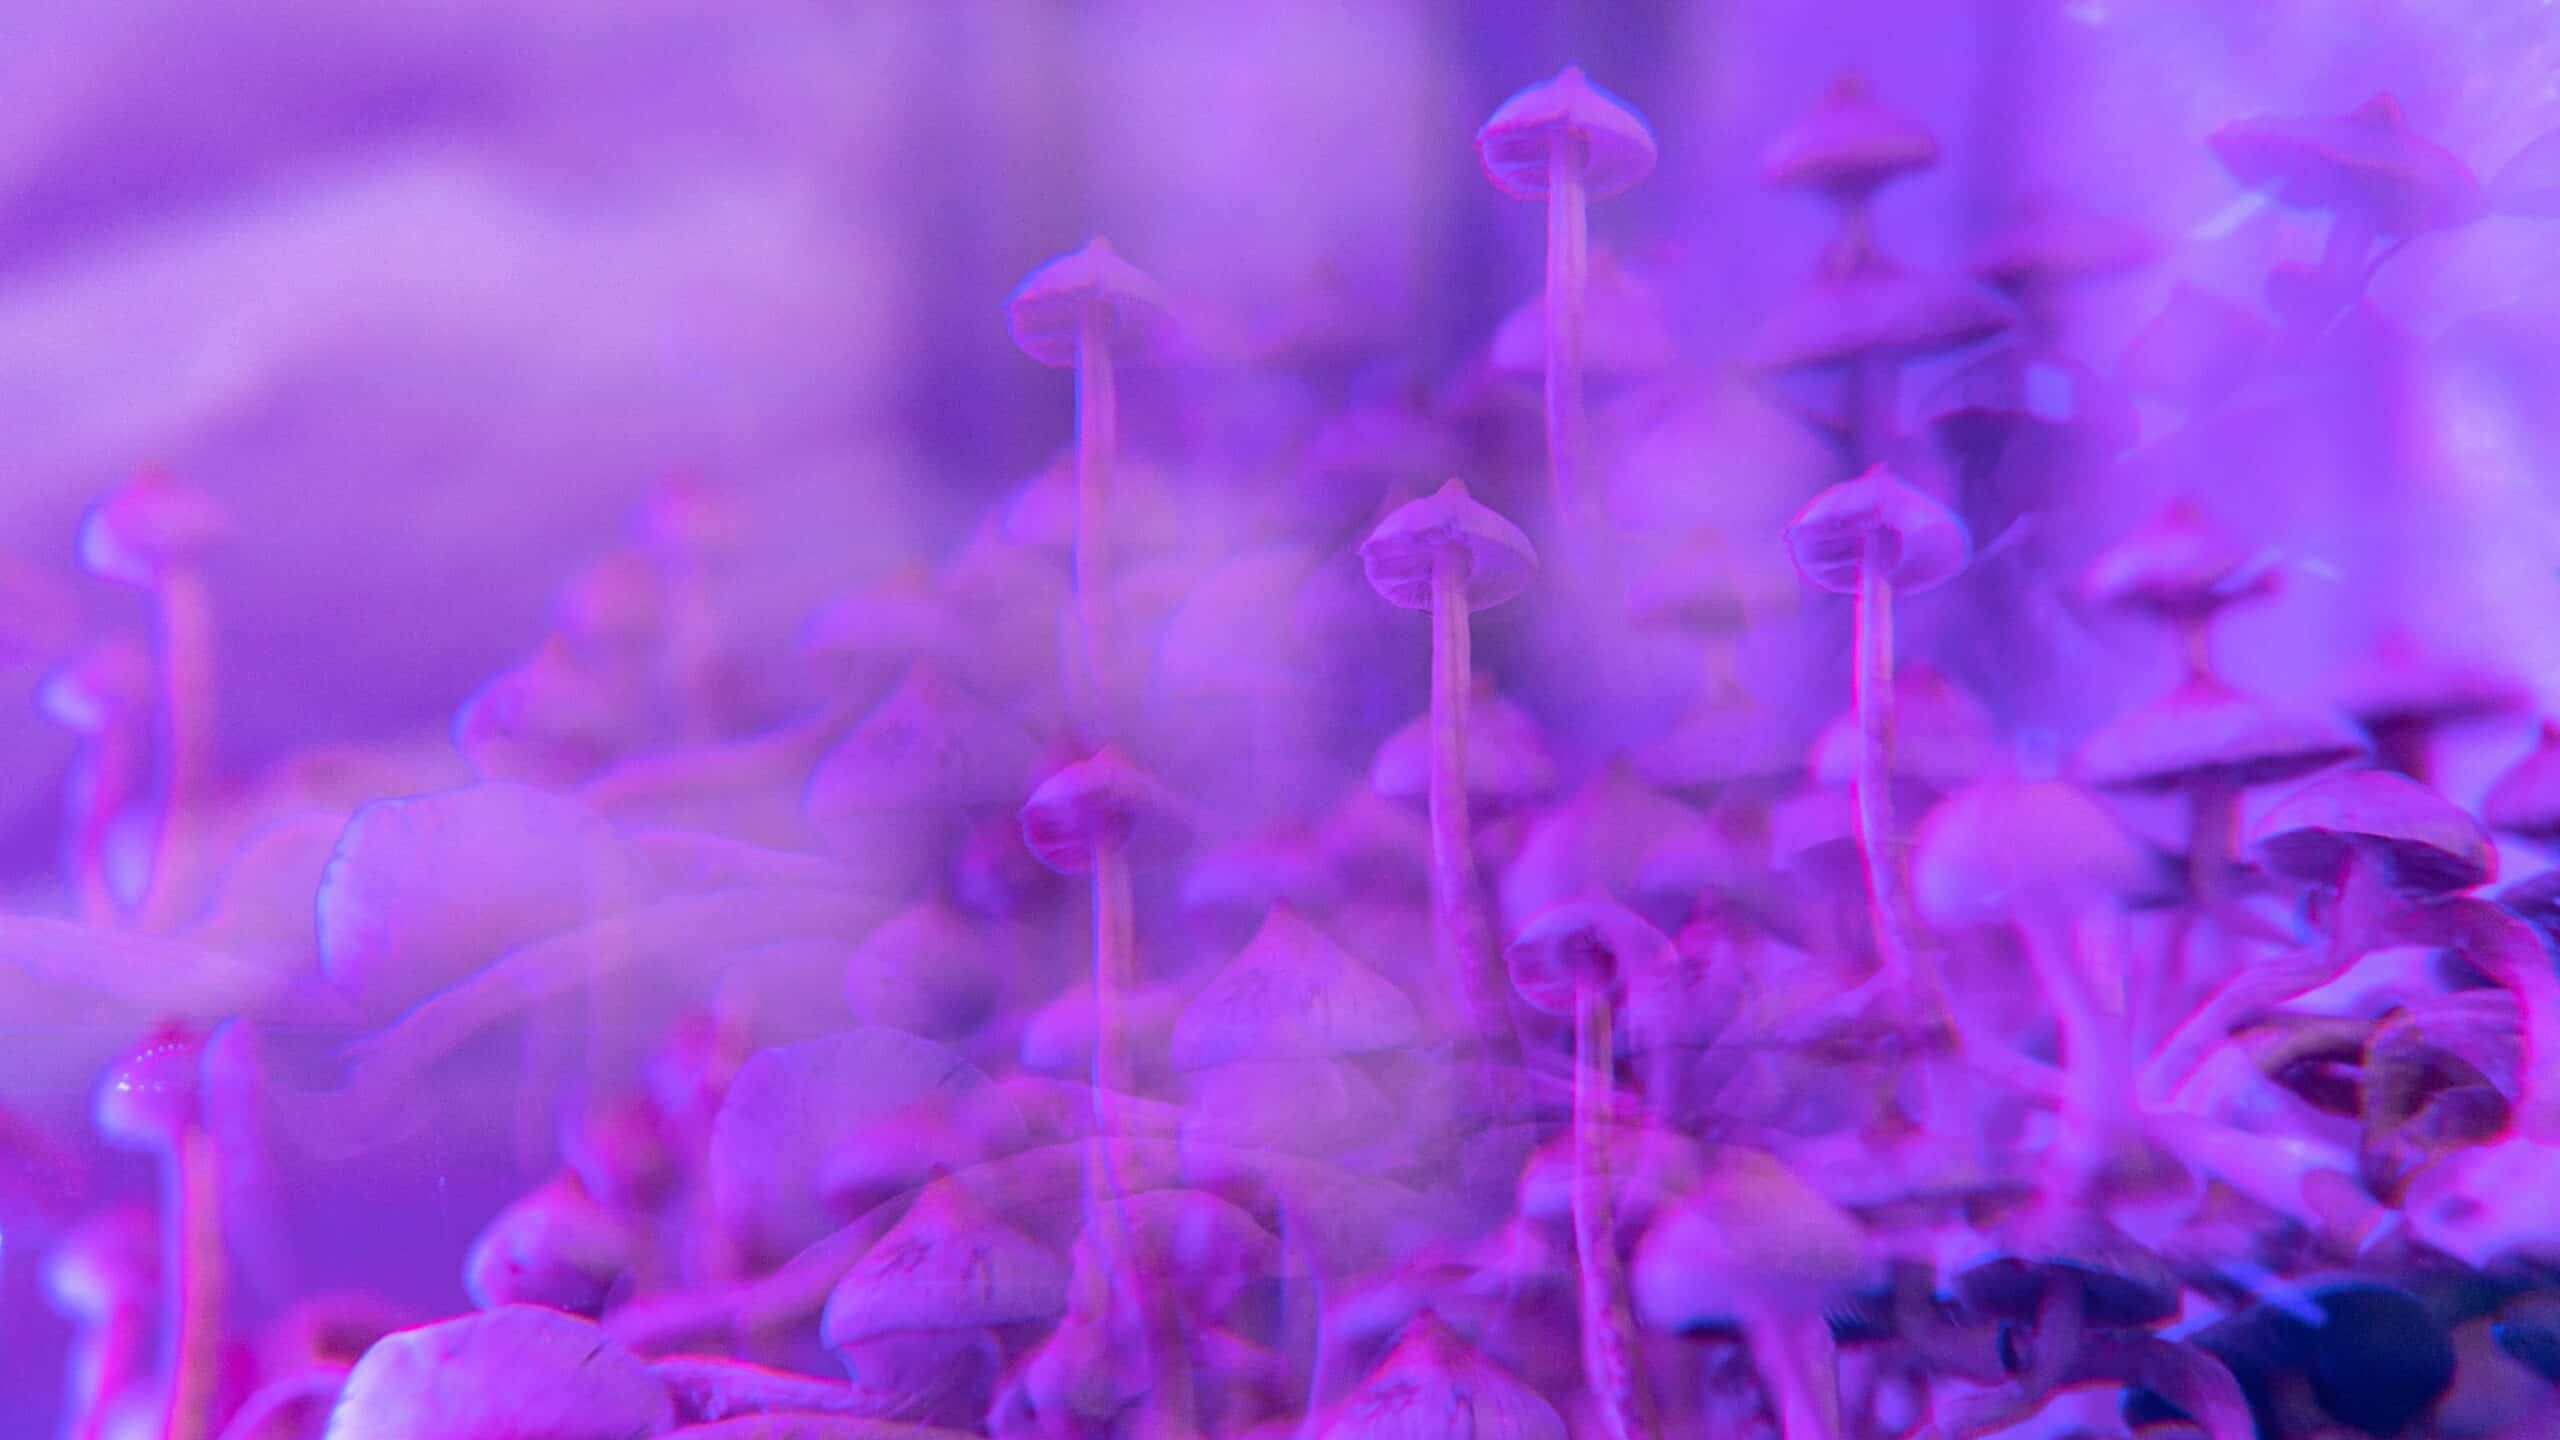 How long do shrooms stay in your system?